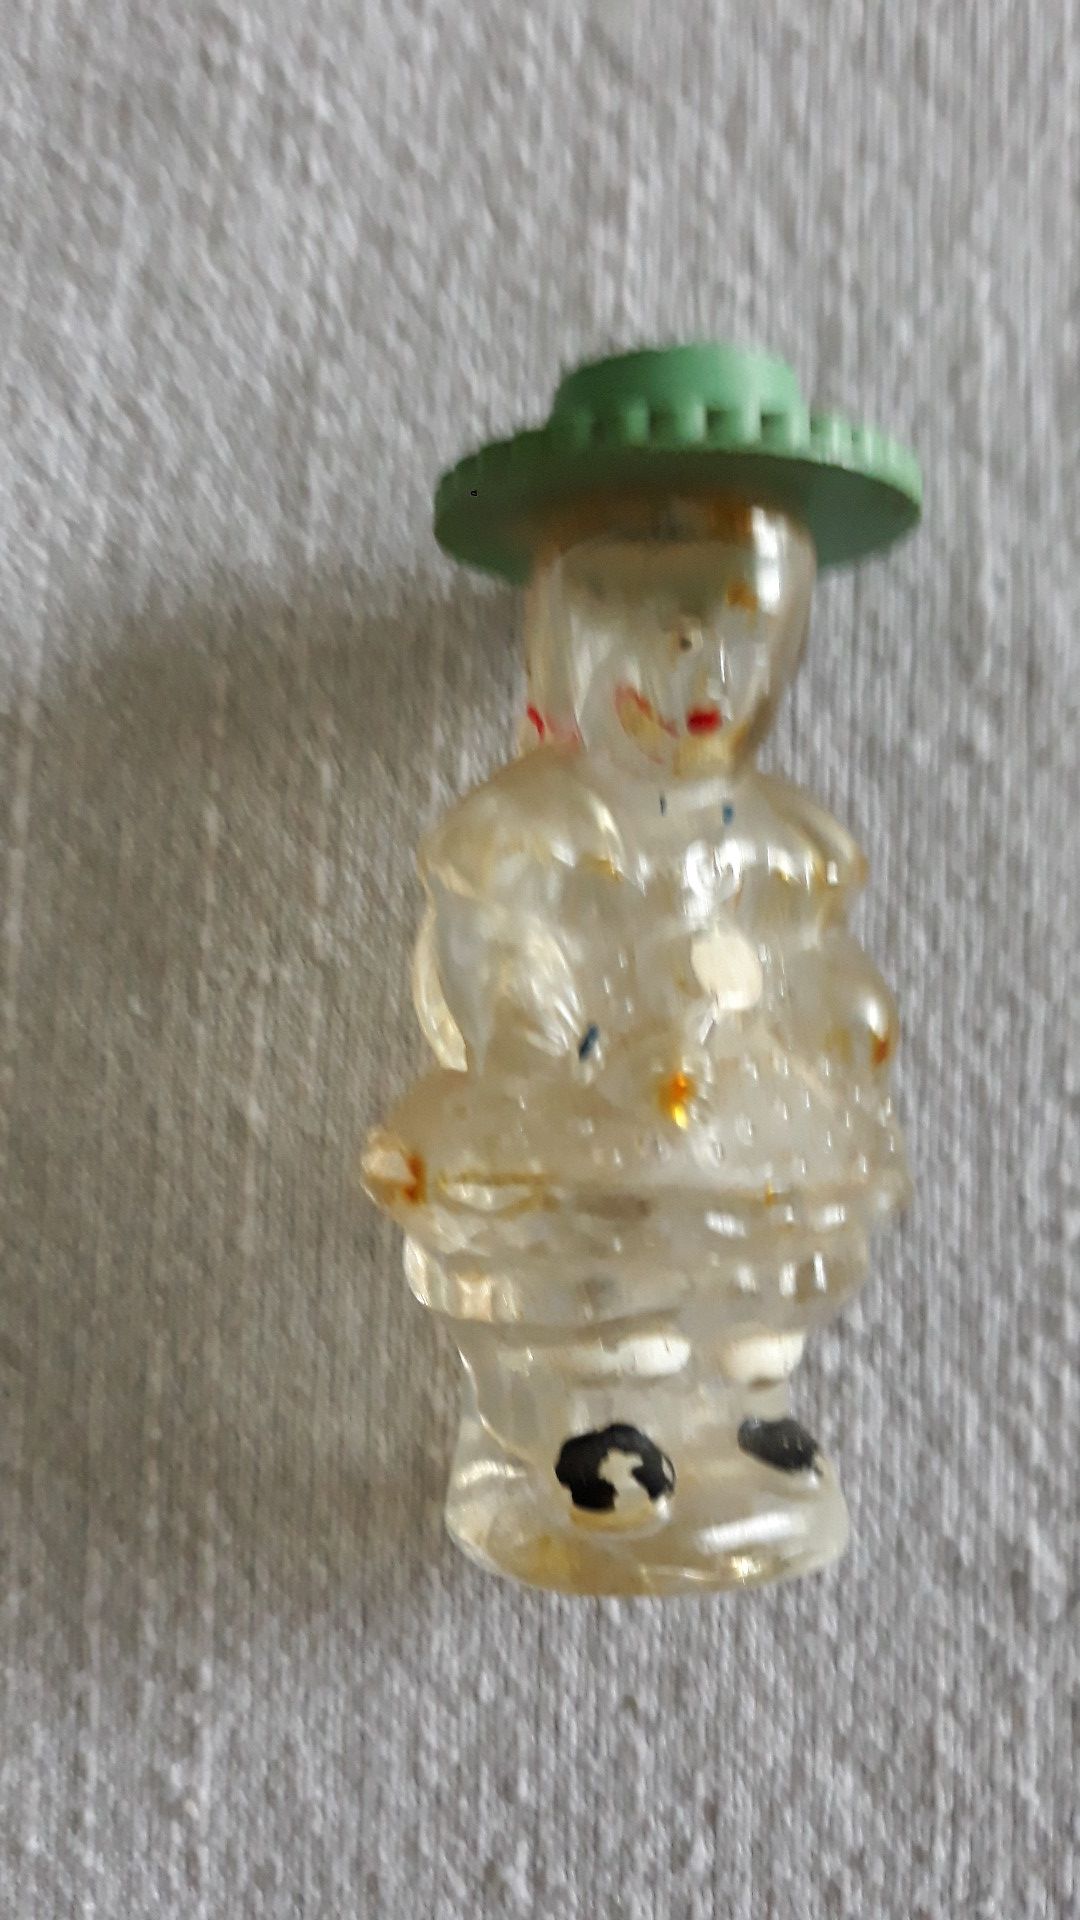 Collectable vintage perfume bottle